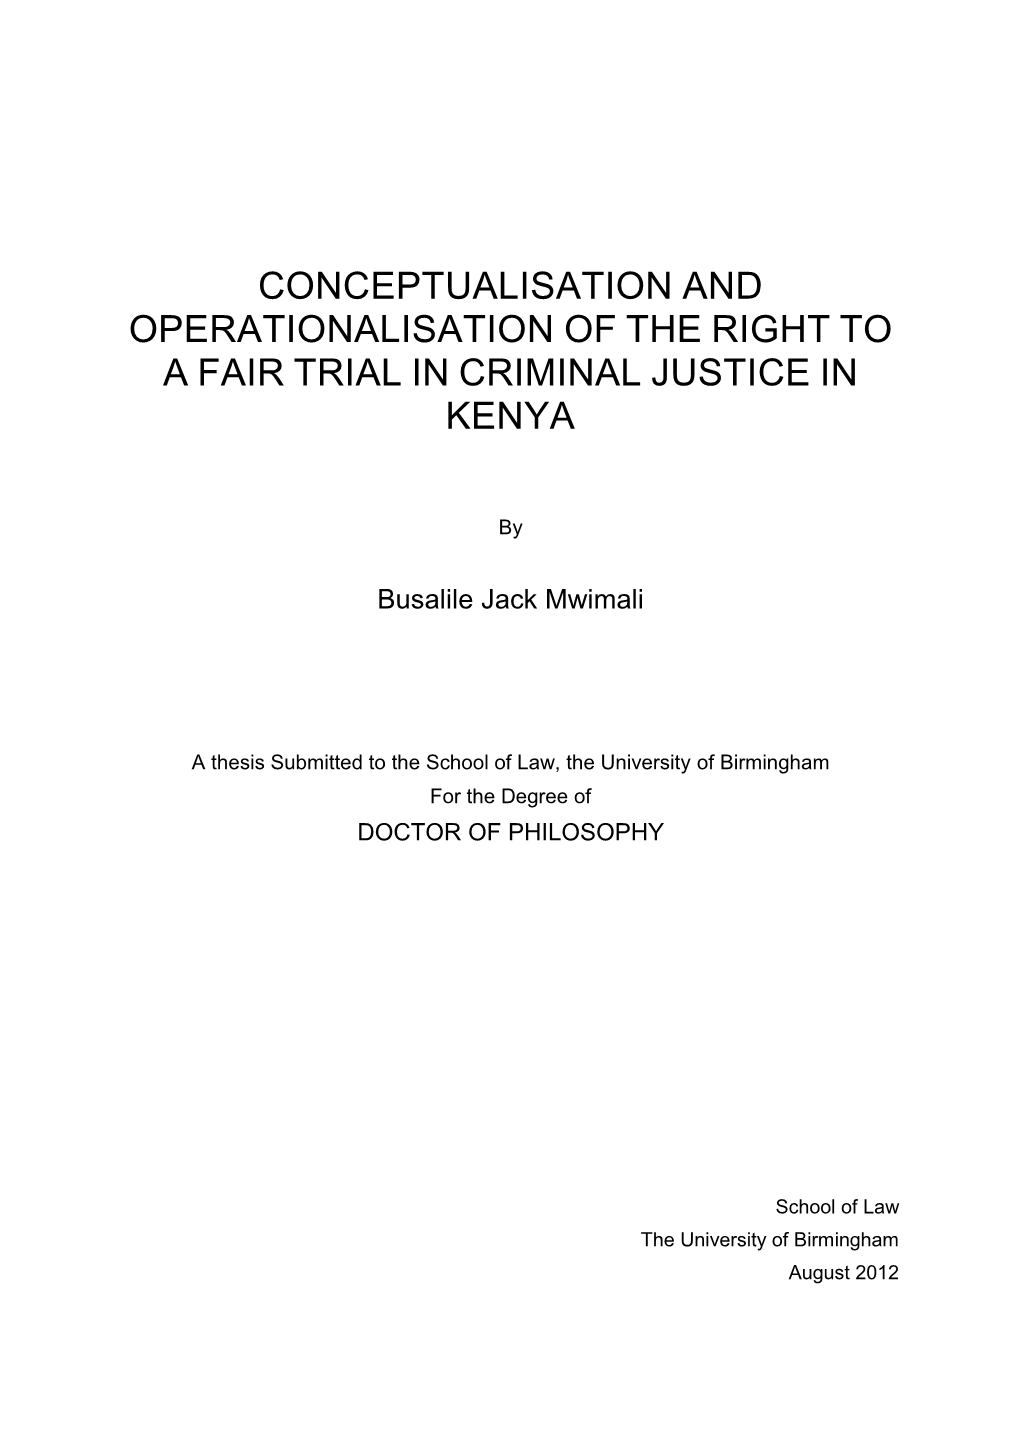 Conceptualisation and Operationalisation of the Right to a Fair Trial in Criminal Justice in Kenya